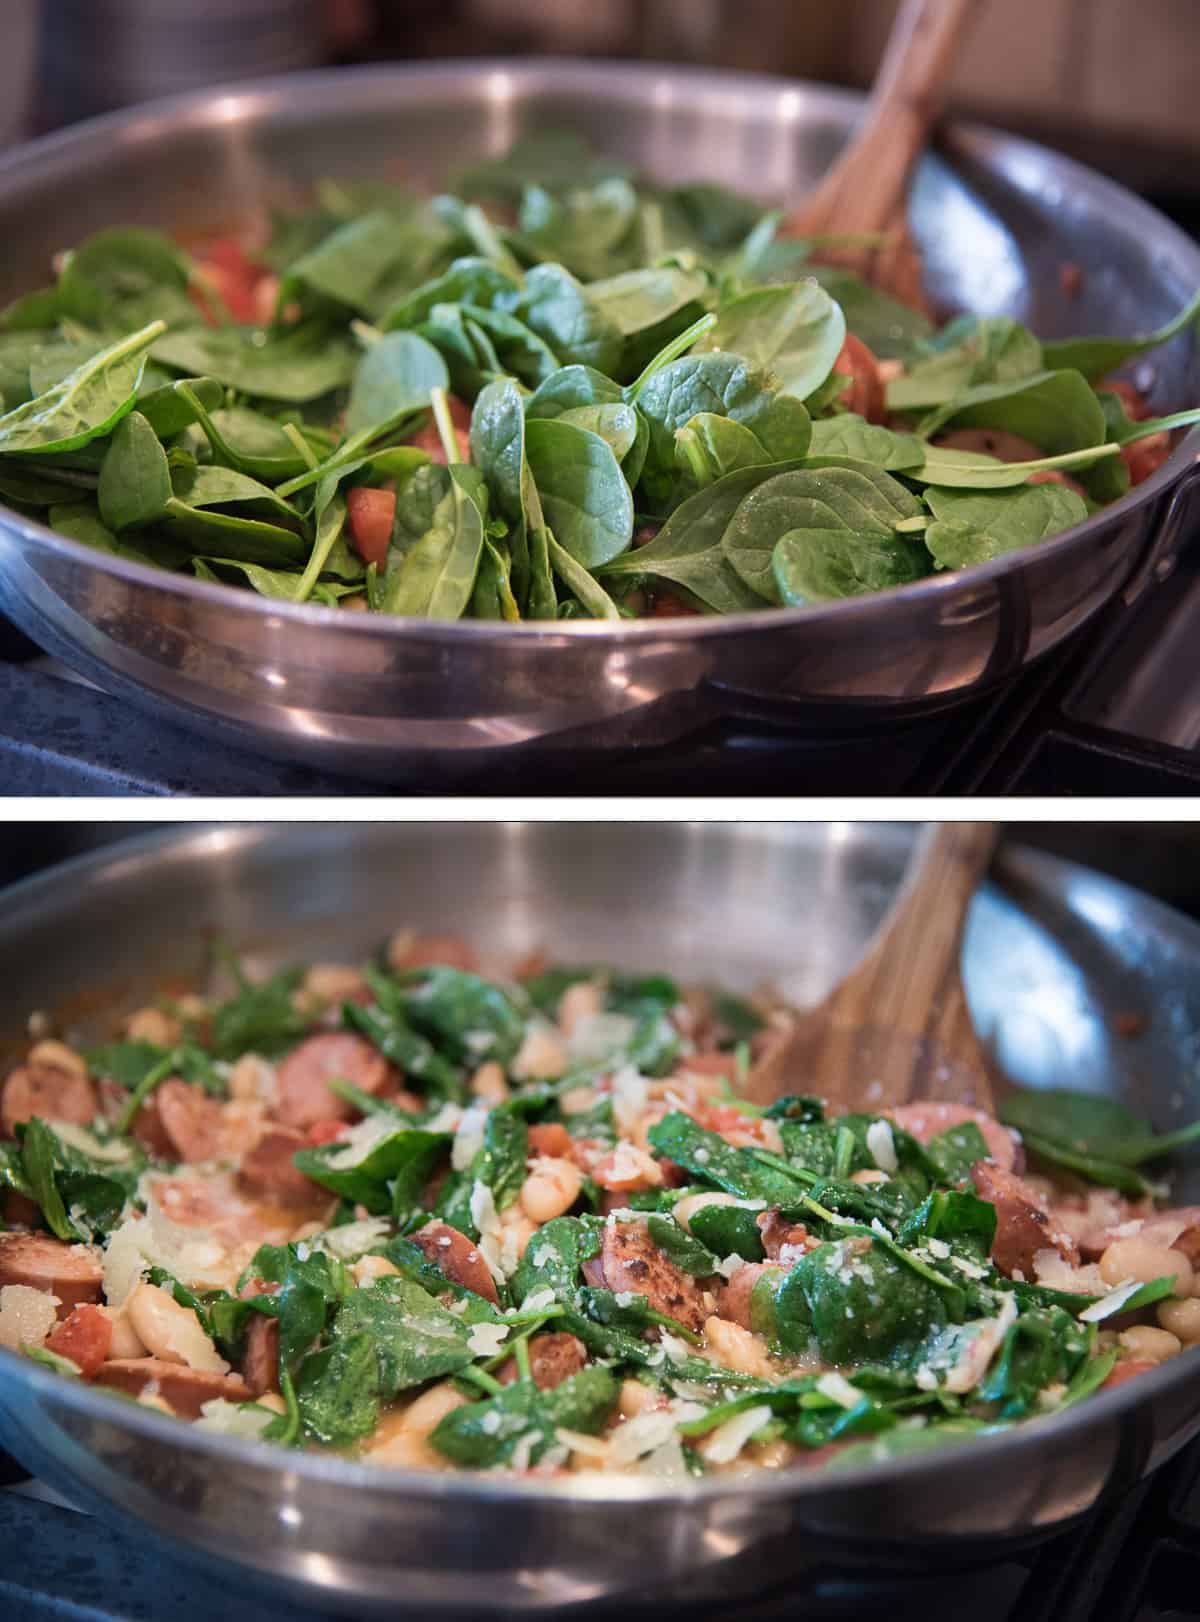 Two images of baby spinach piled on top of other ingredients in a skillet and a spoon stirring the mixture.